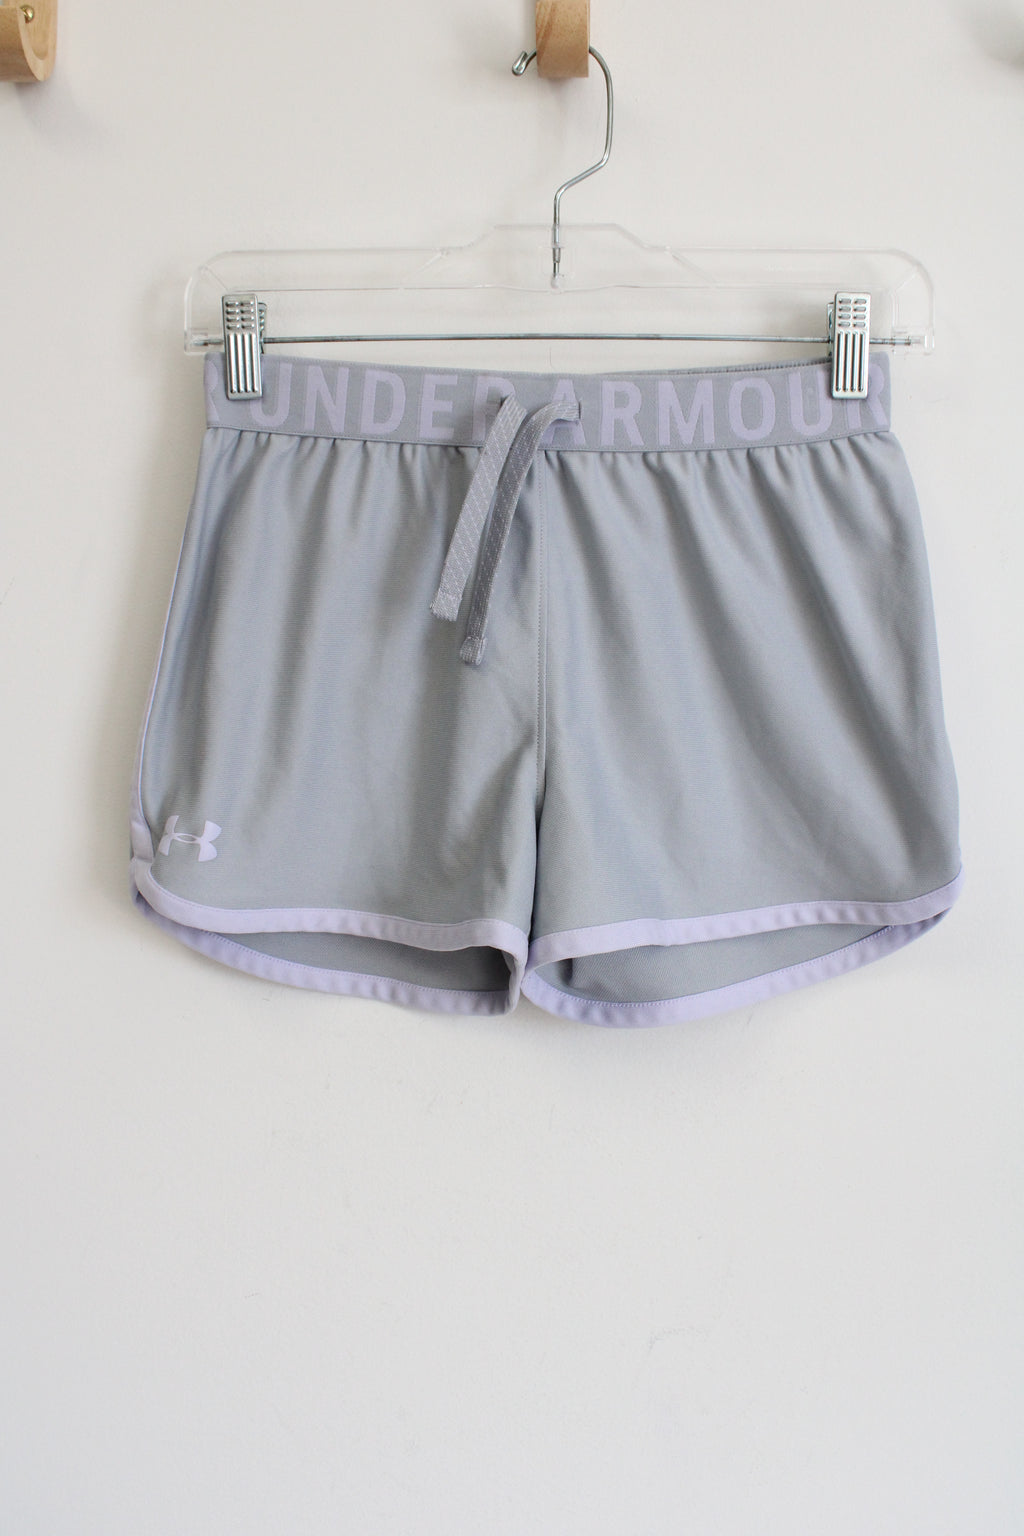 Under Armour Gray & Lavender Shorts | Youth L (14/16)